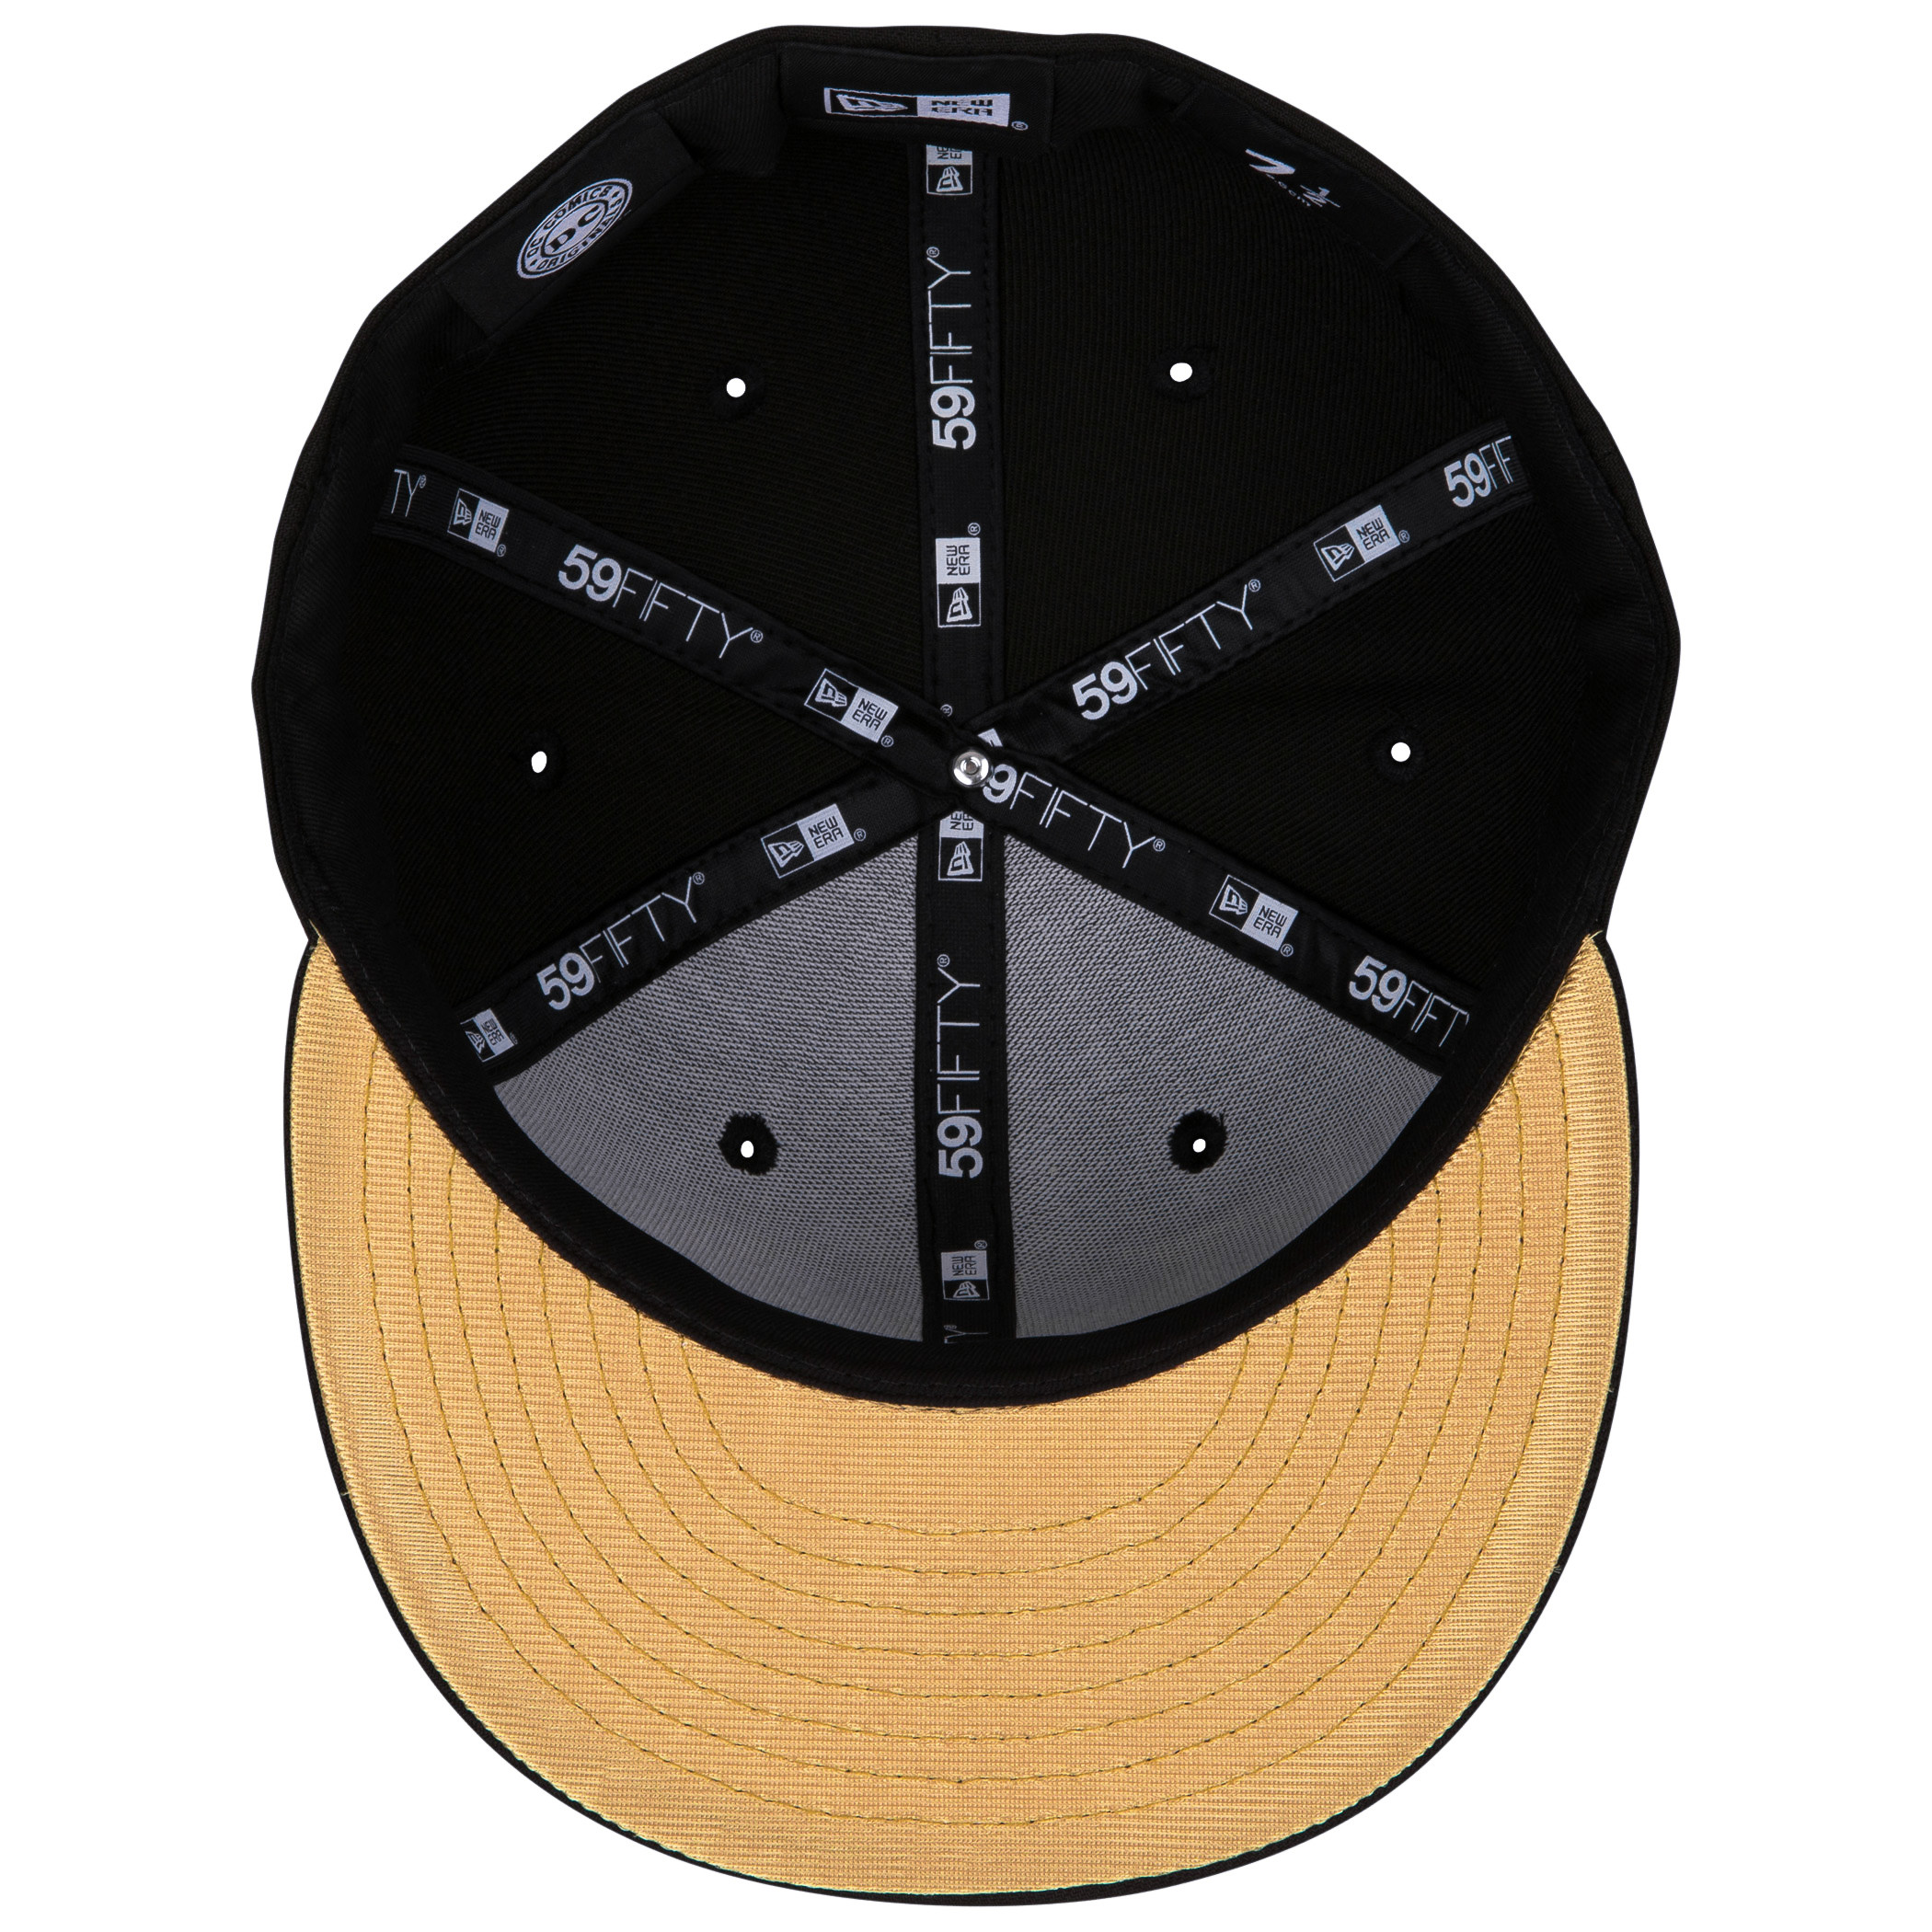 Batman Gold Logo Black Colorway New Era 59Fifty Fitted Hat